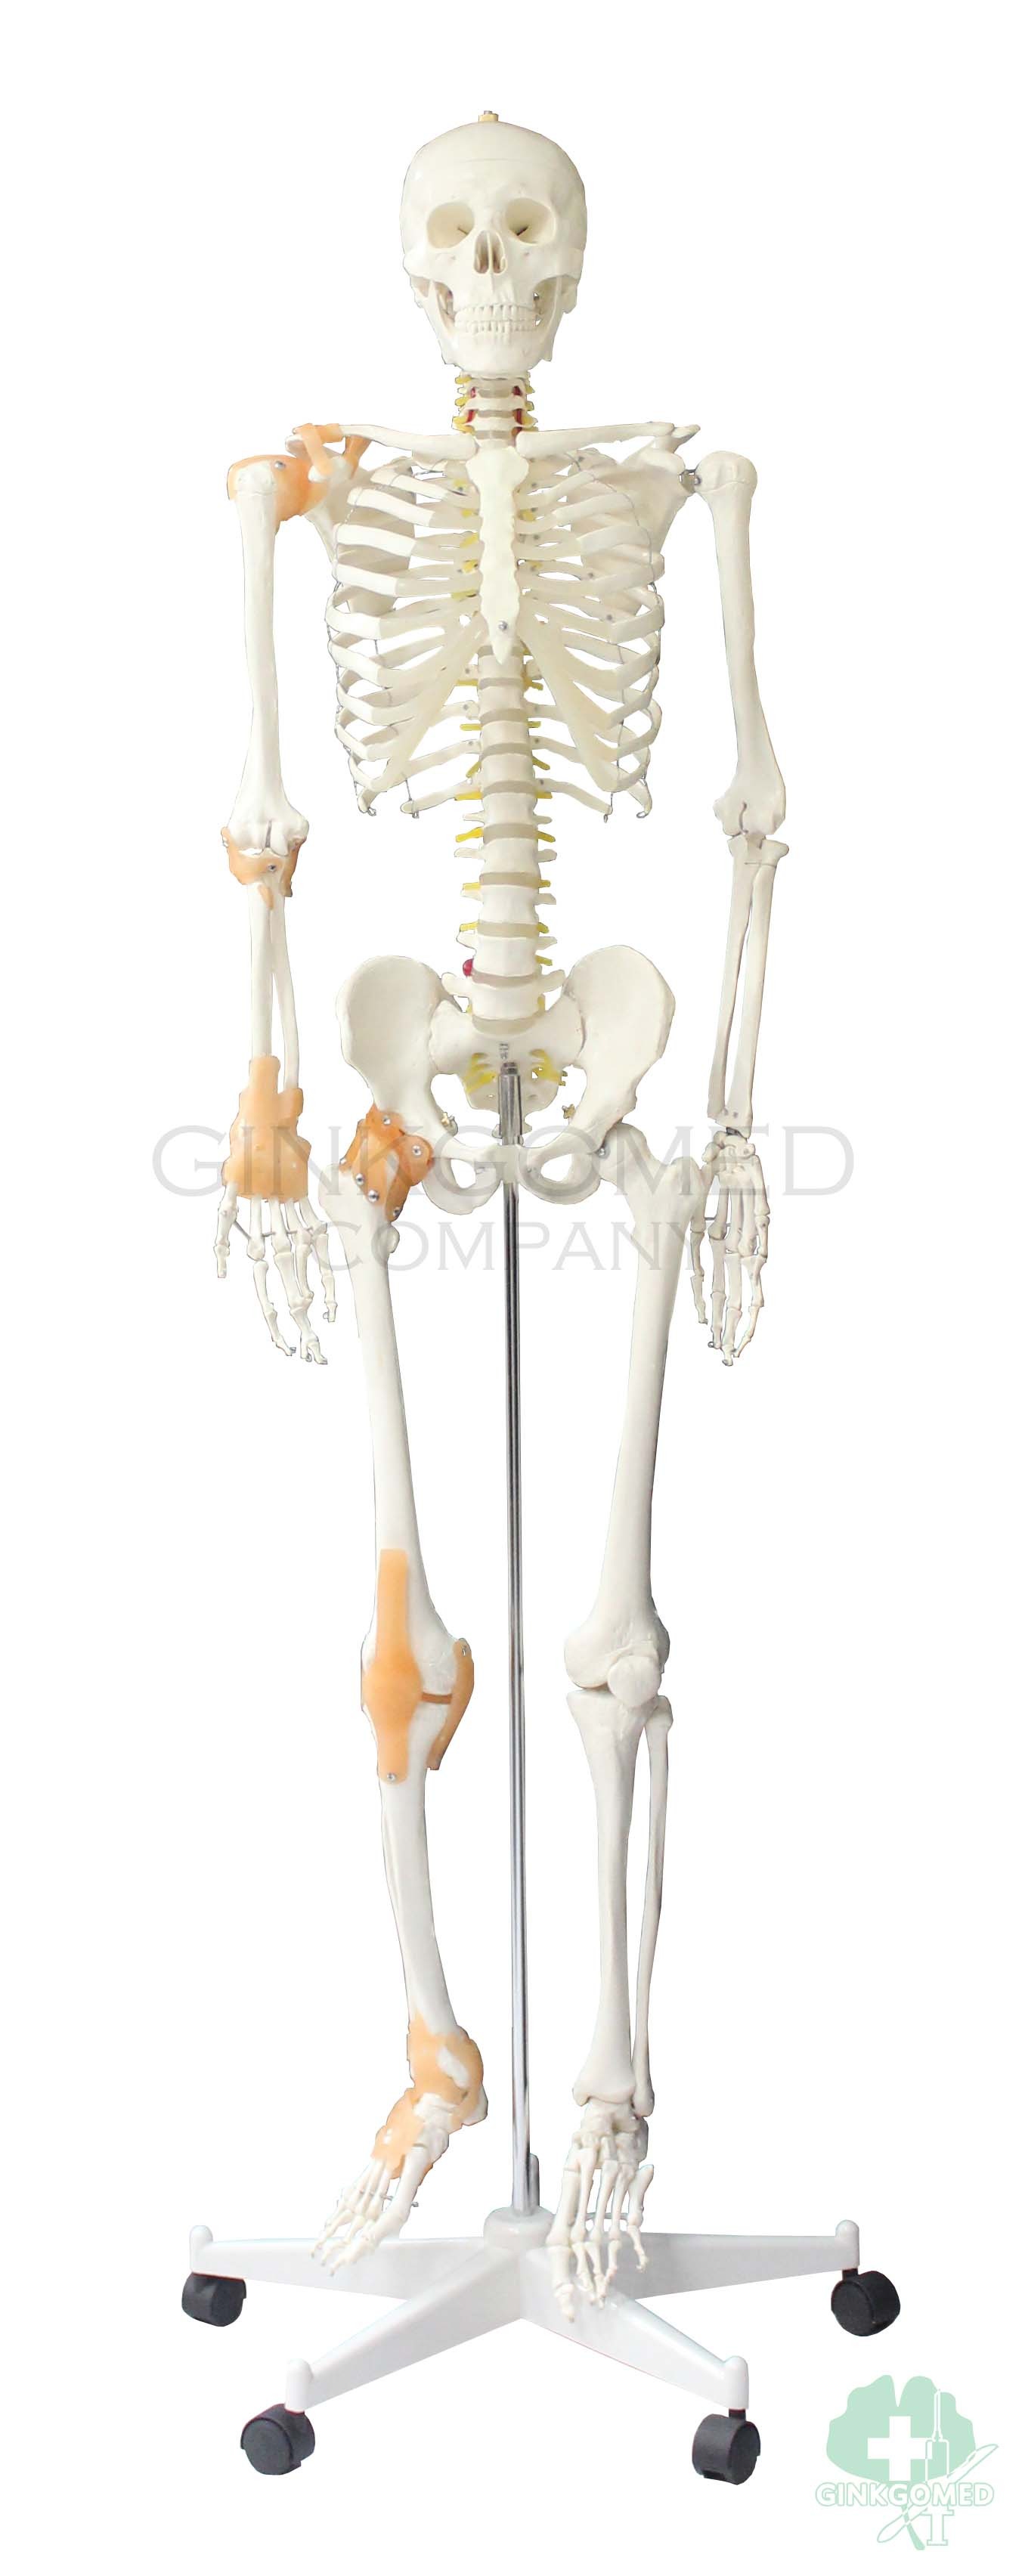 GM-010056 Articulated Human Skeleton with Ligaments